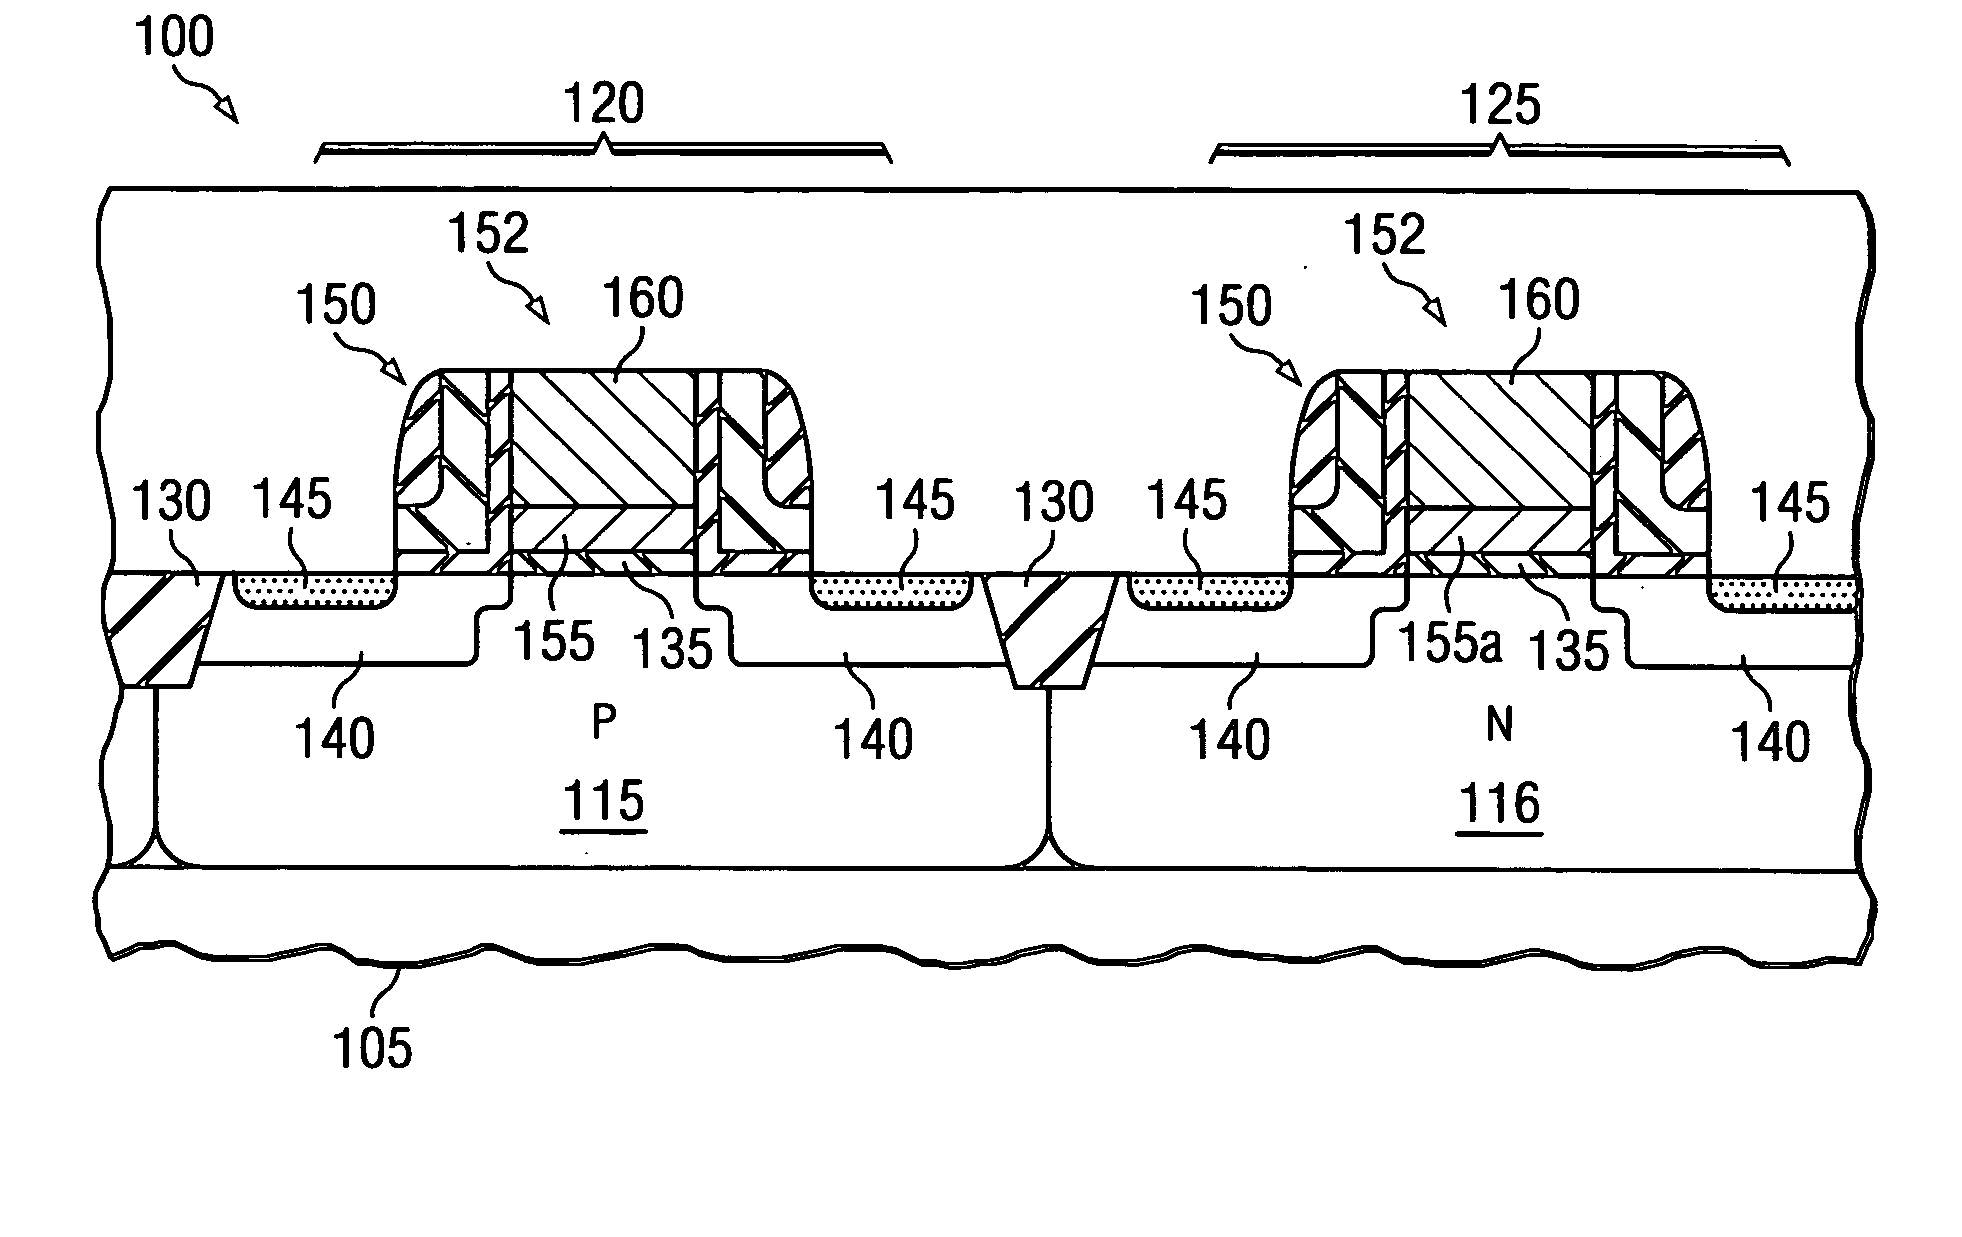 Process for manufacturing dual work function metal gates in a microelectronics device